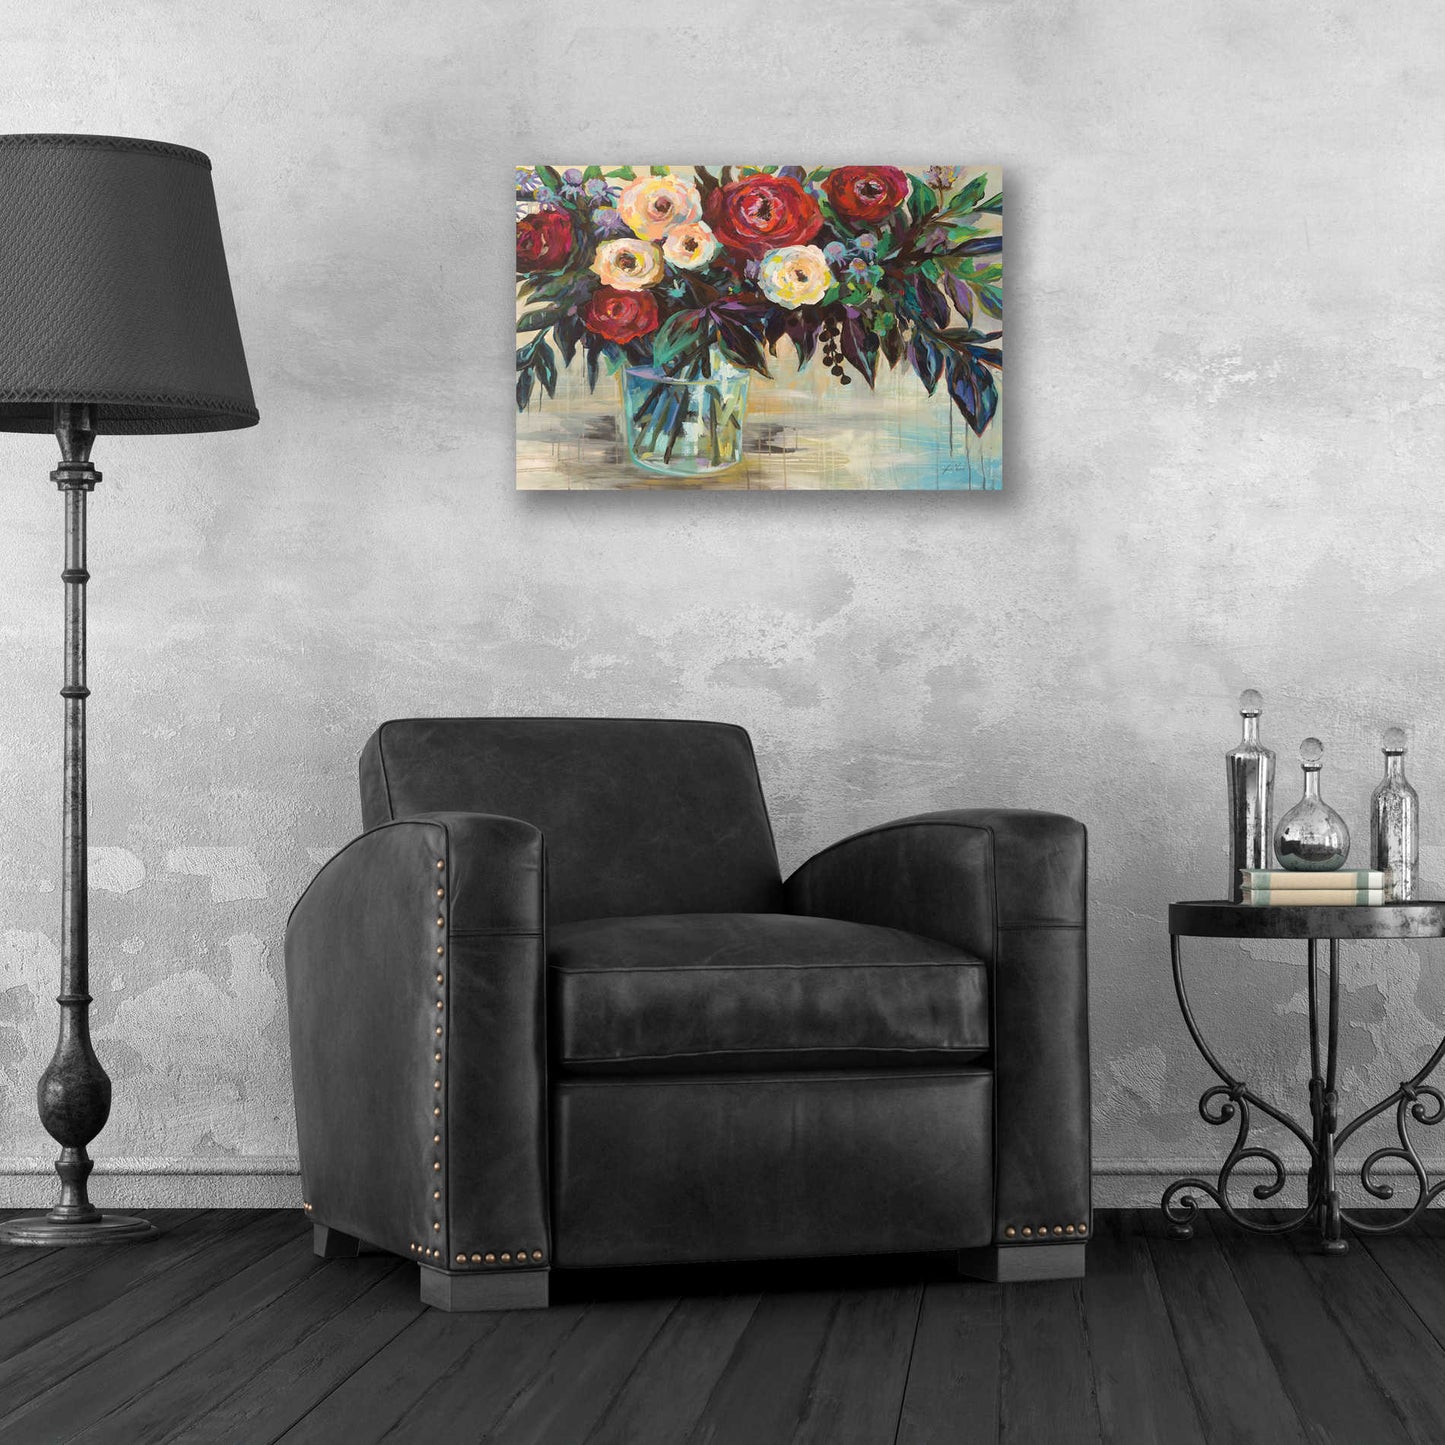 Epic Art 'Winter Floral Crop' by Jeanette Vertentes, Acrylic Glass Wall Art,24x16